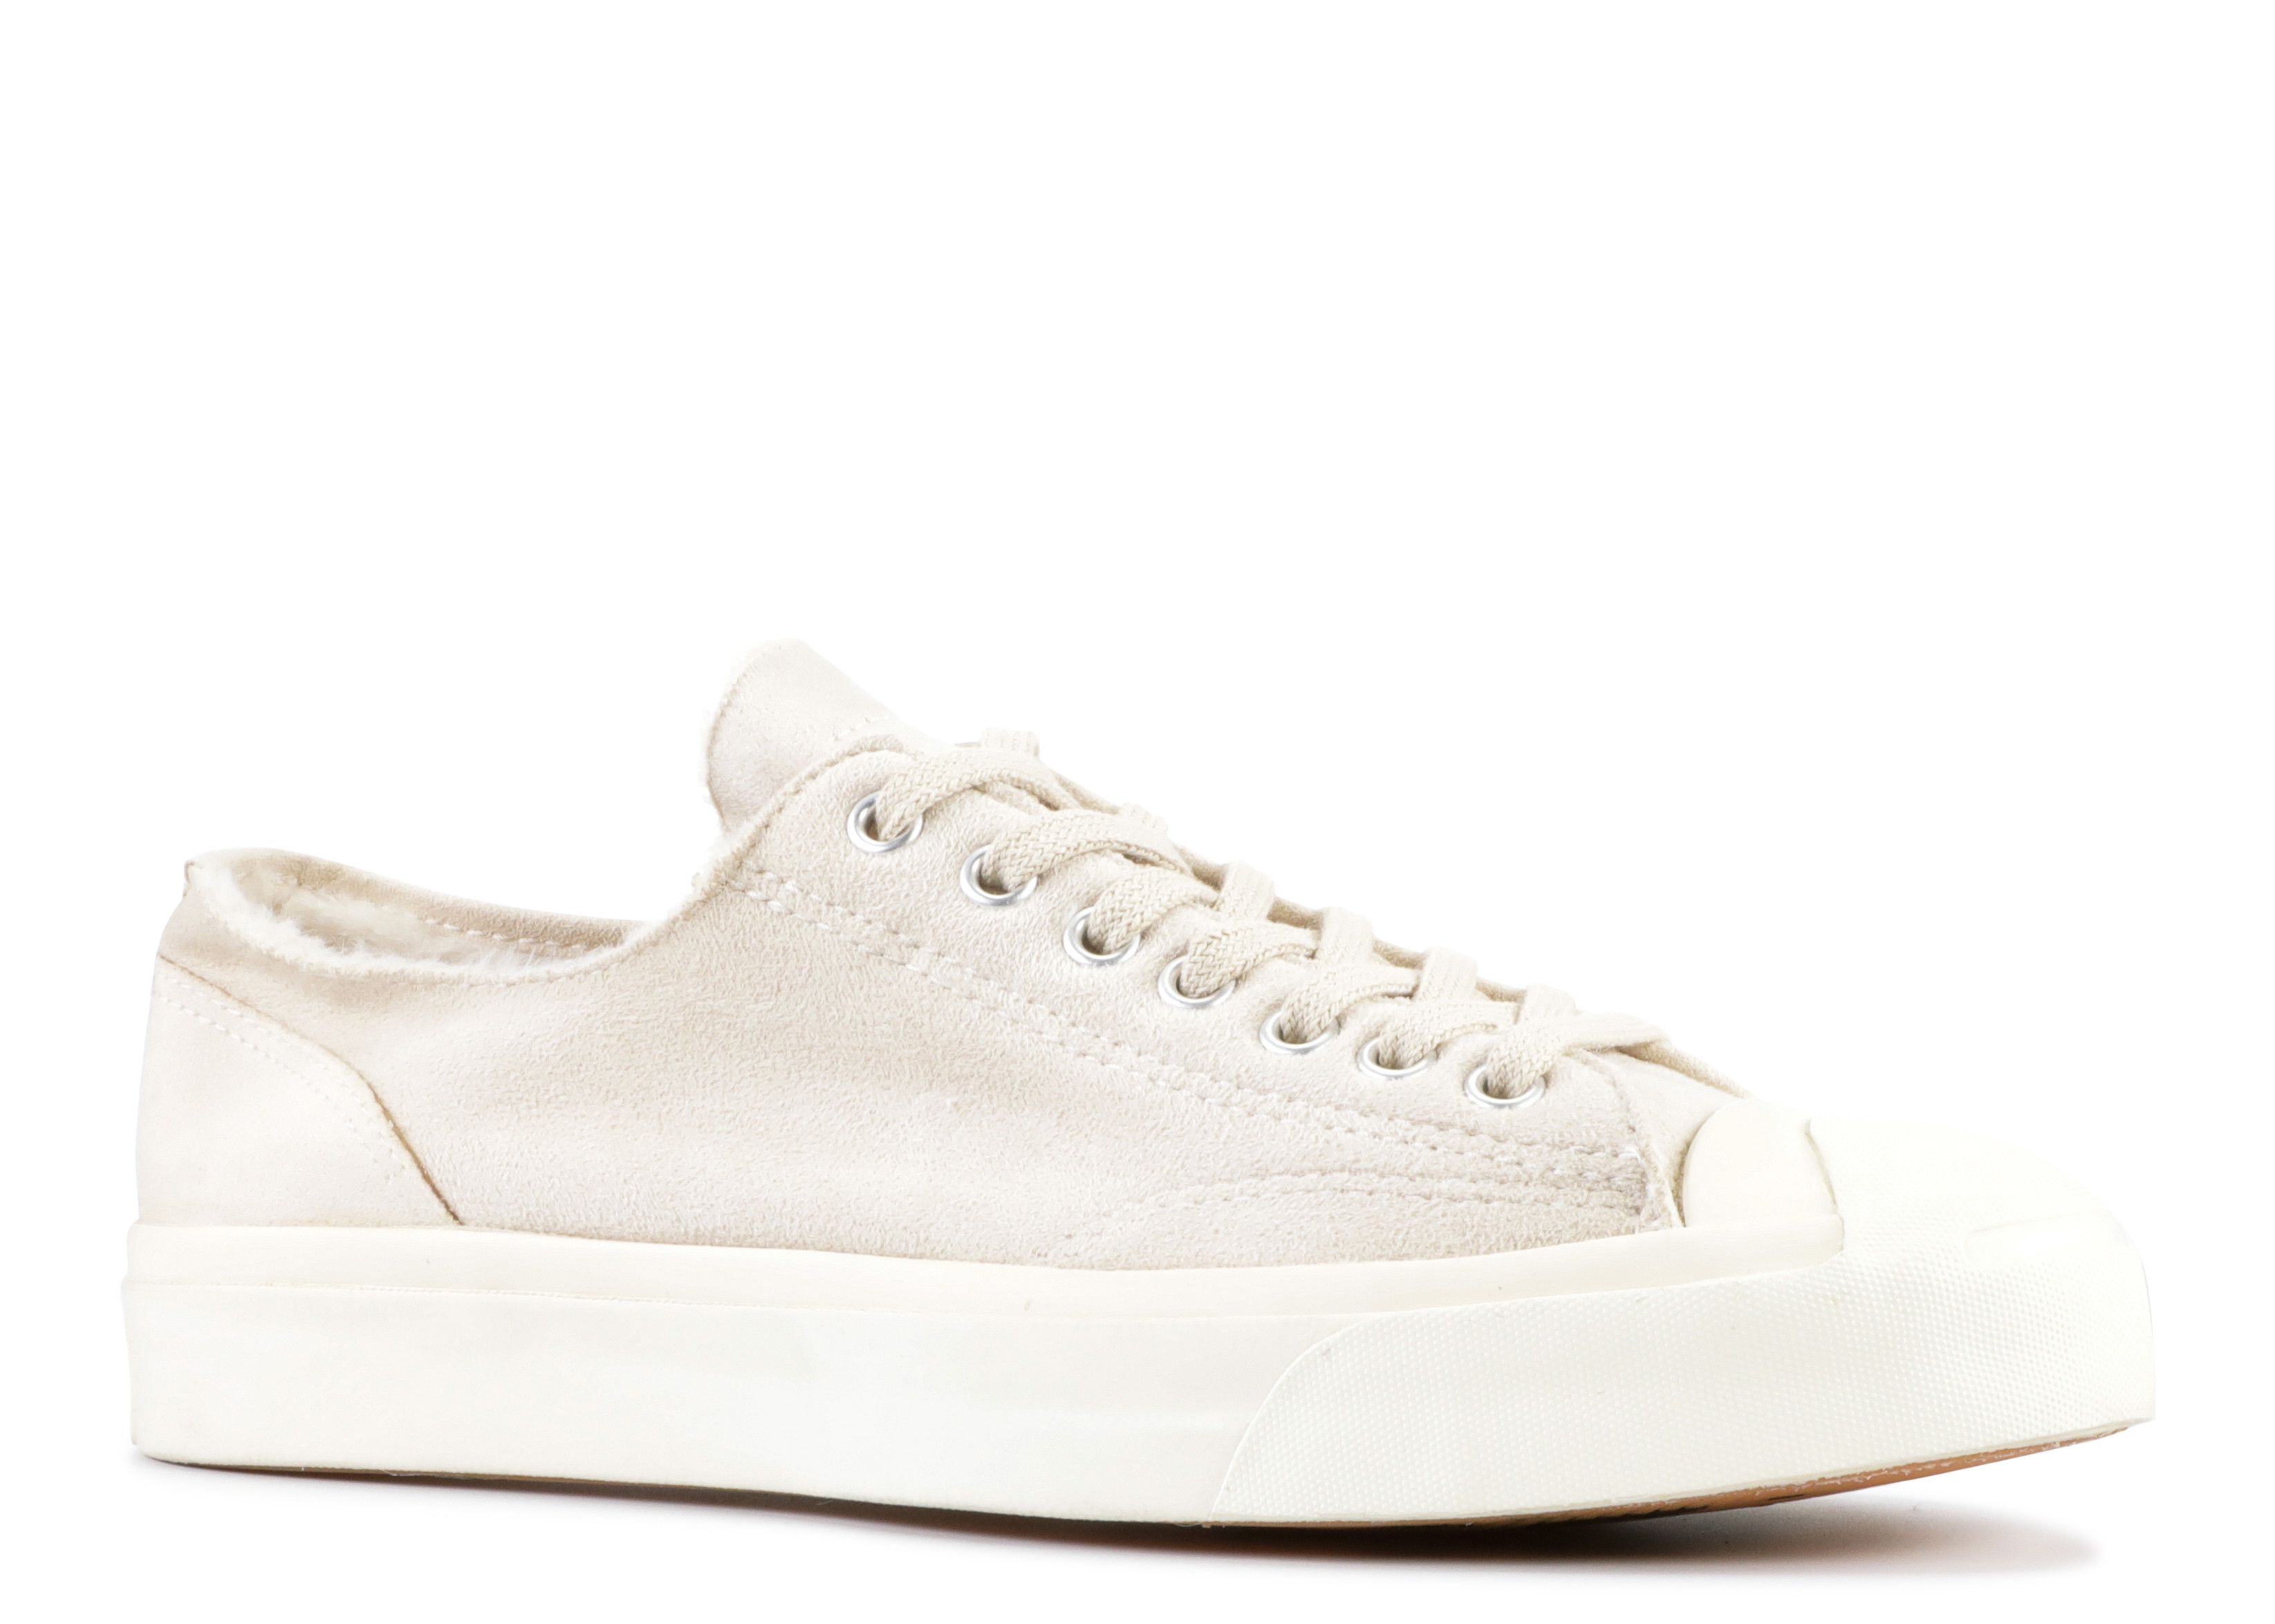 CLOT X Jack Purcell Low 'Ice Cold 